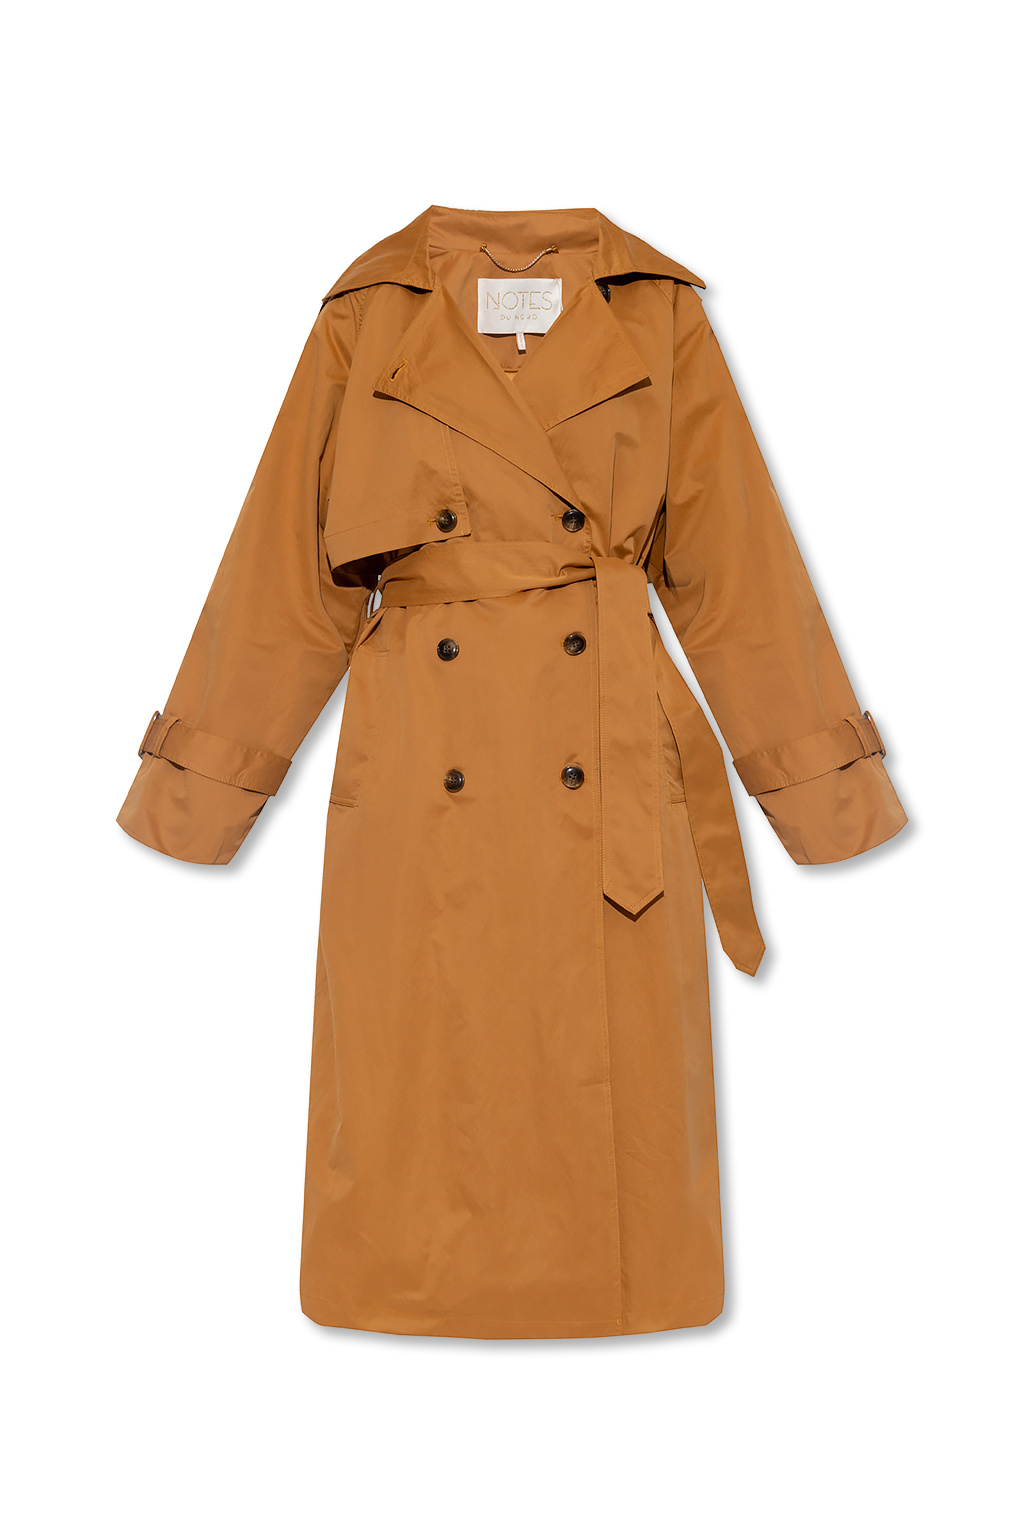 GIRLS CLOTHES 4-14 YEARS ‘Totem’ trench coat